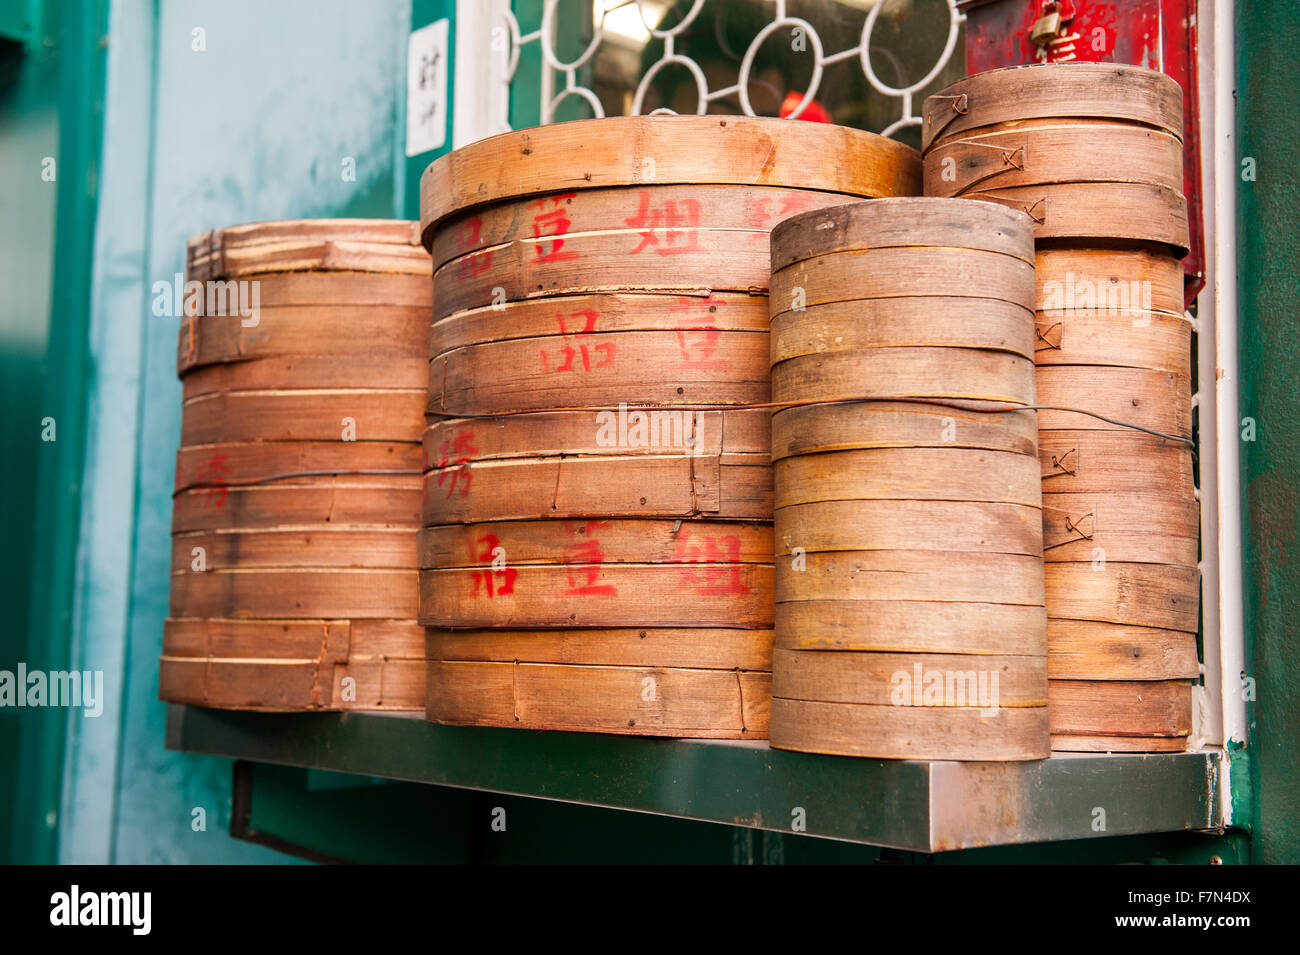 Stack of bamboo Chinese cooking steam baskets on shelf Stock Photo